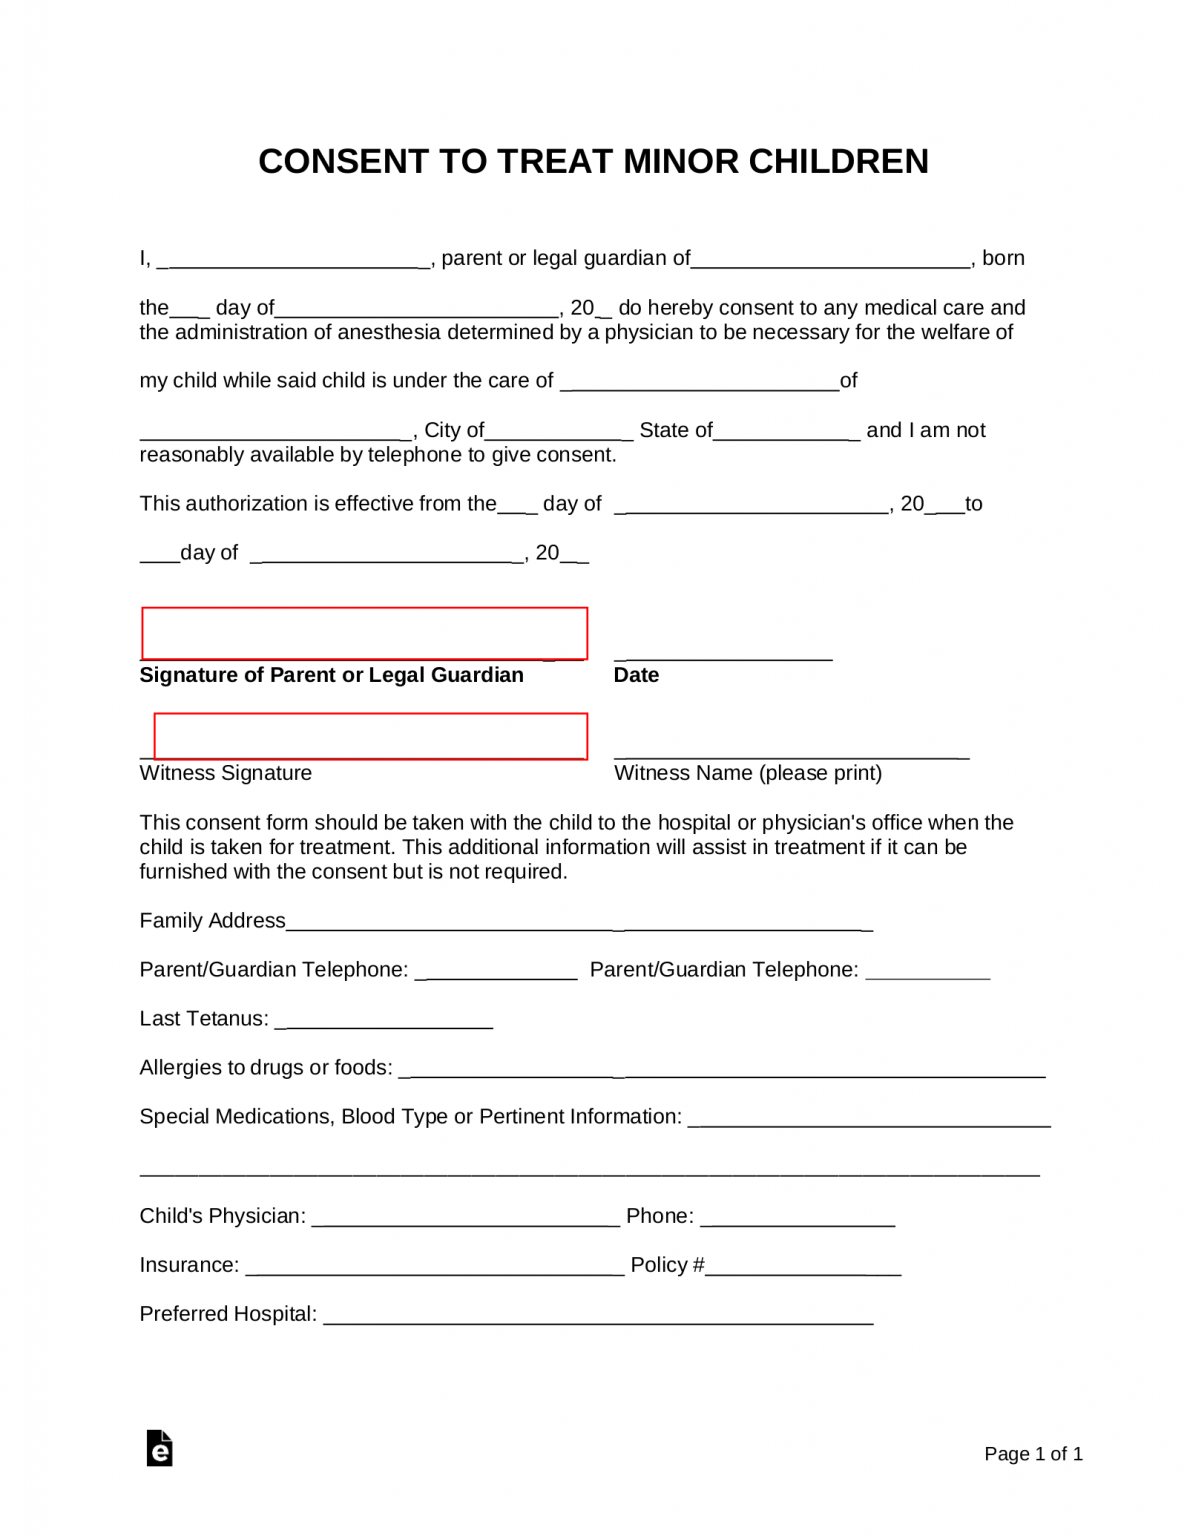 state department travel consent form